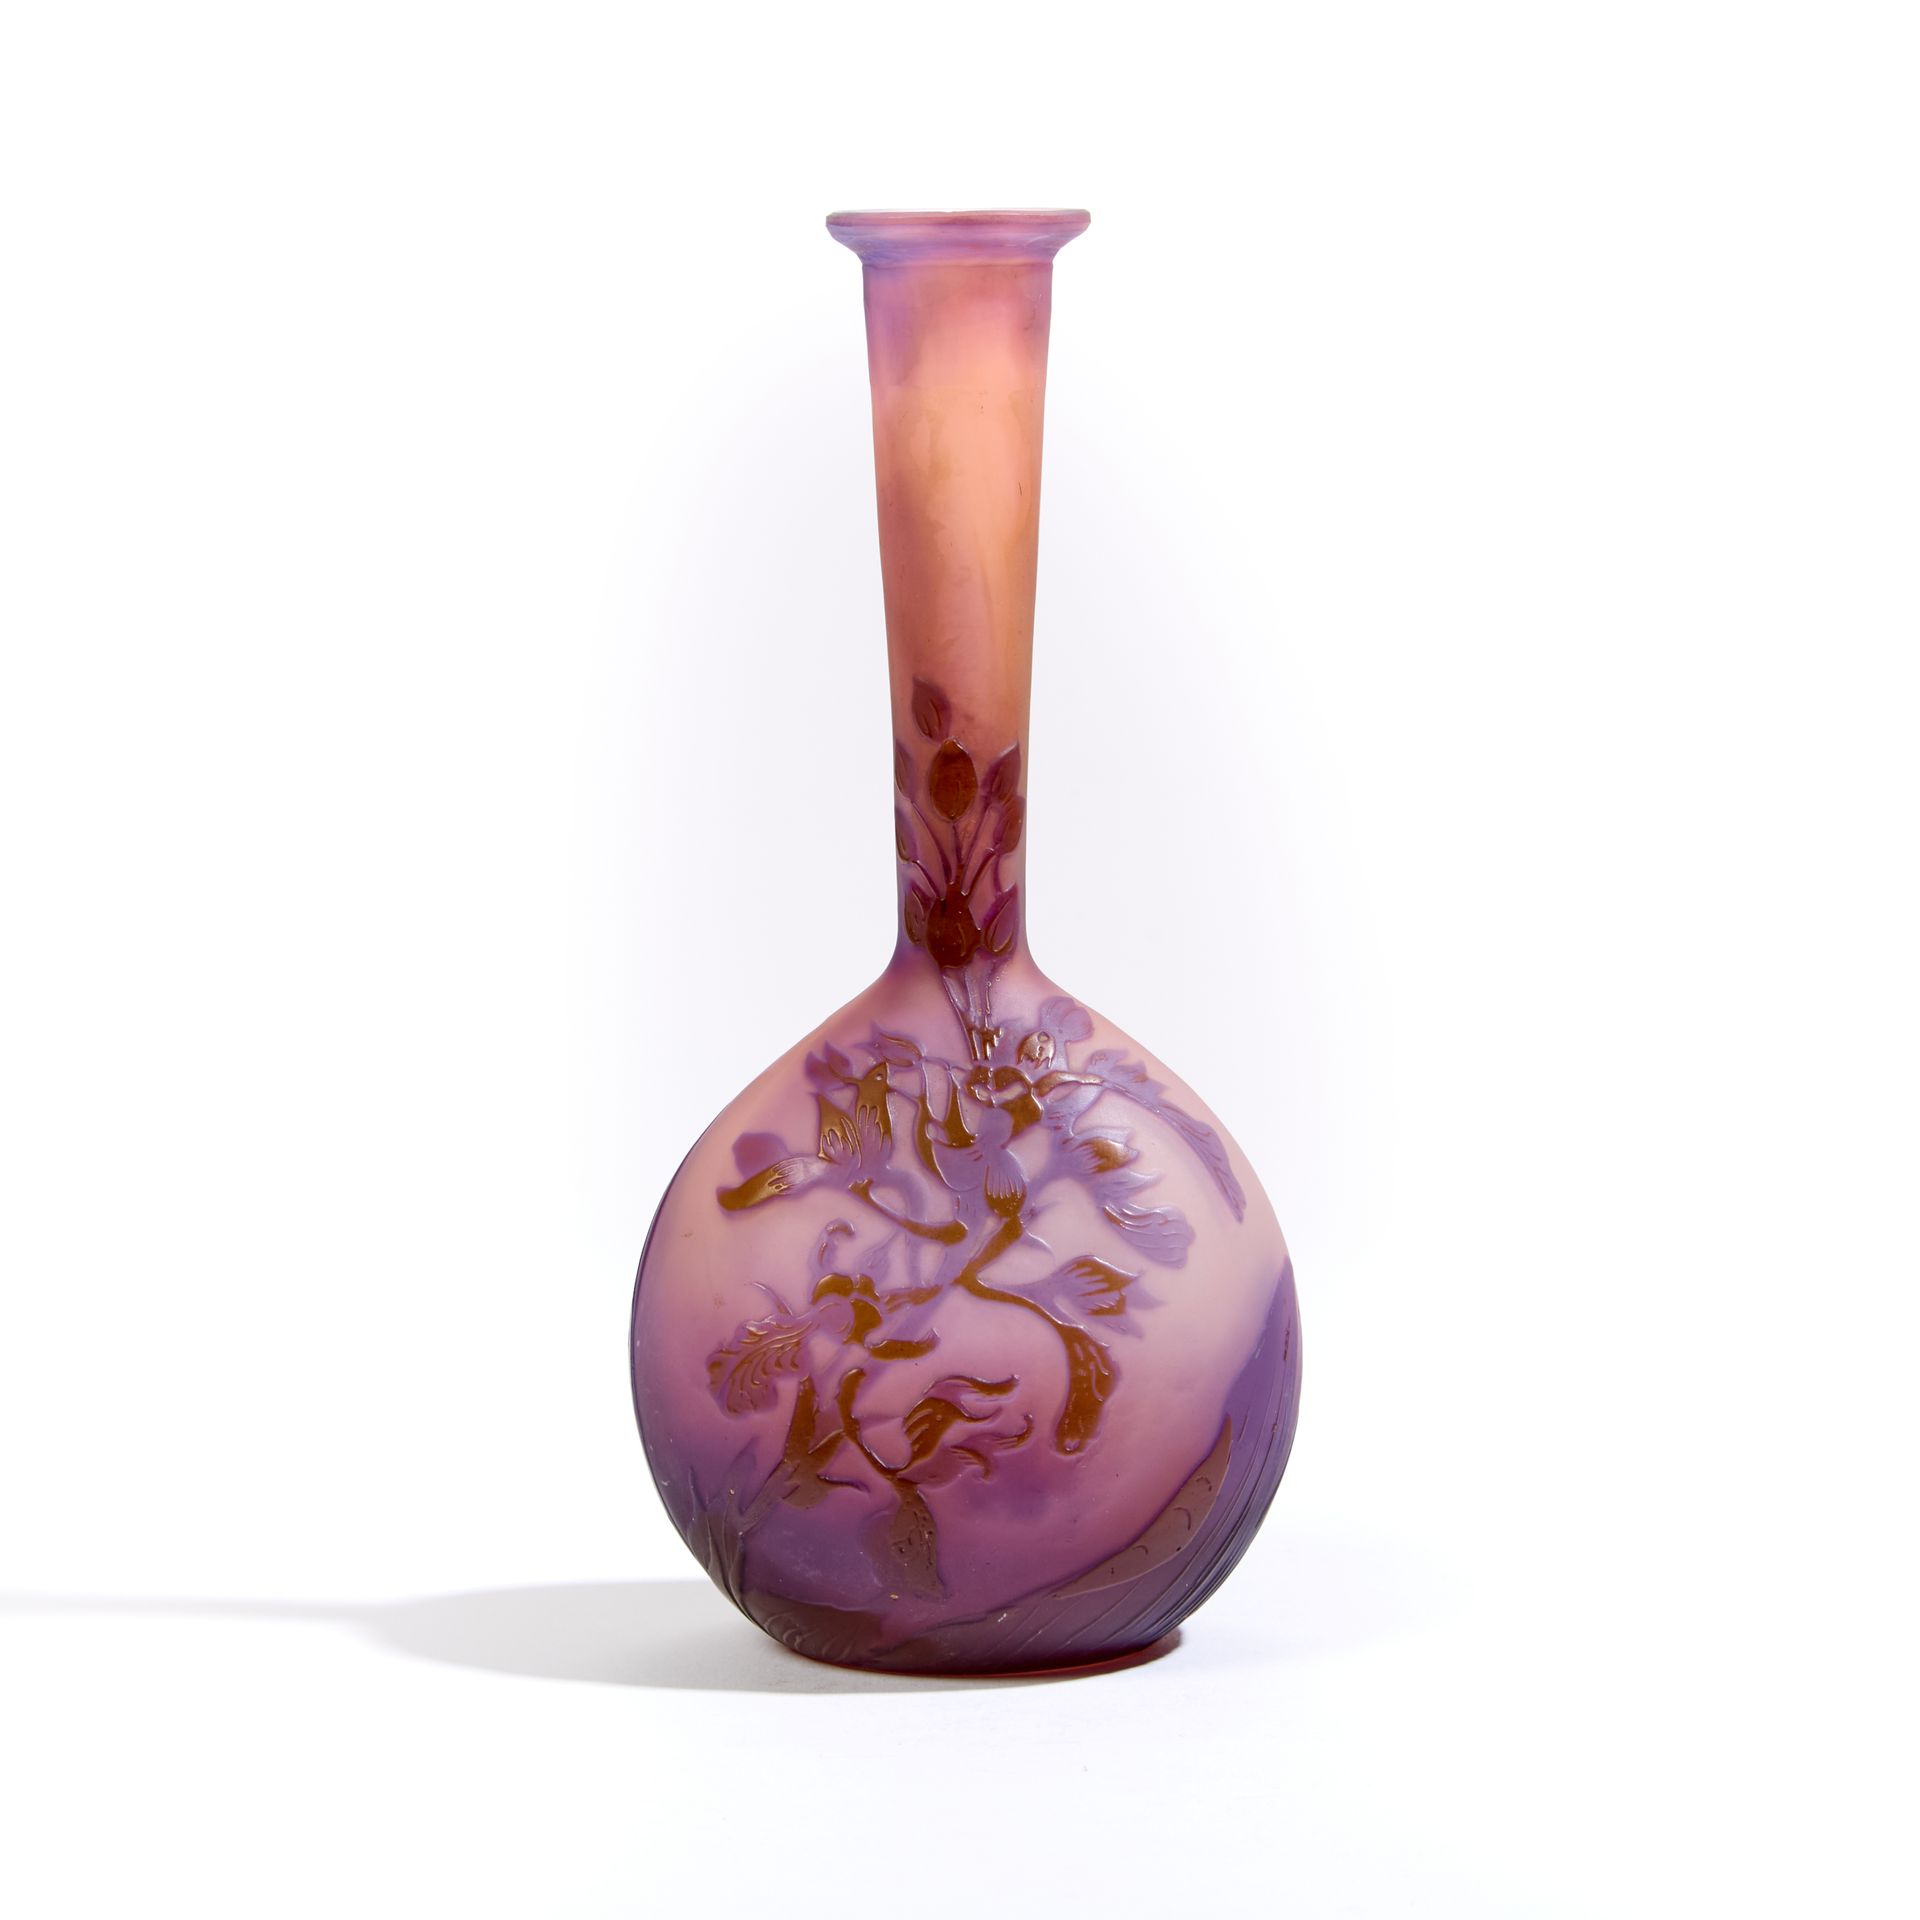 Null Etablissements GALLE.

Small soliflore vase in multi-layered glass with aci&hellip;